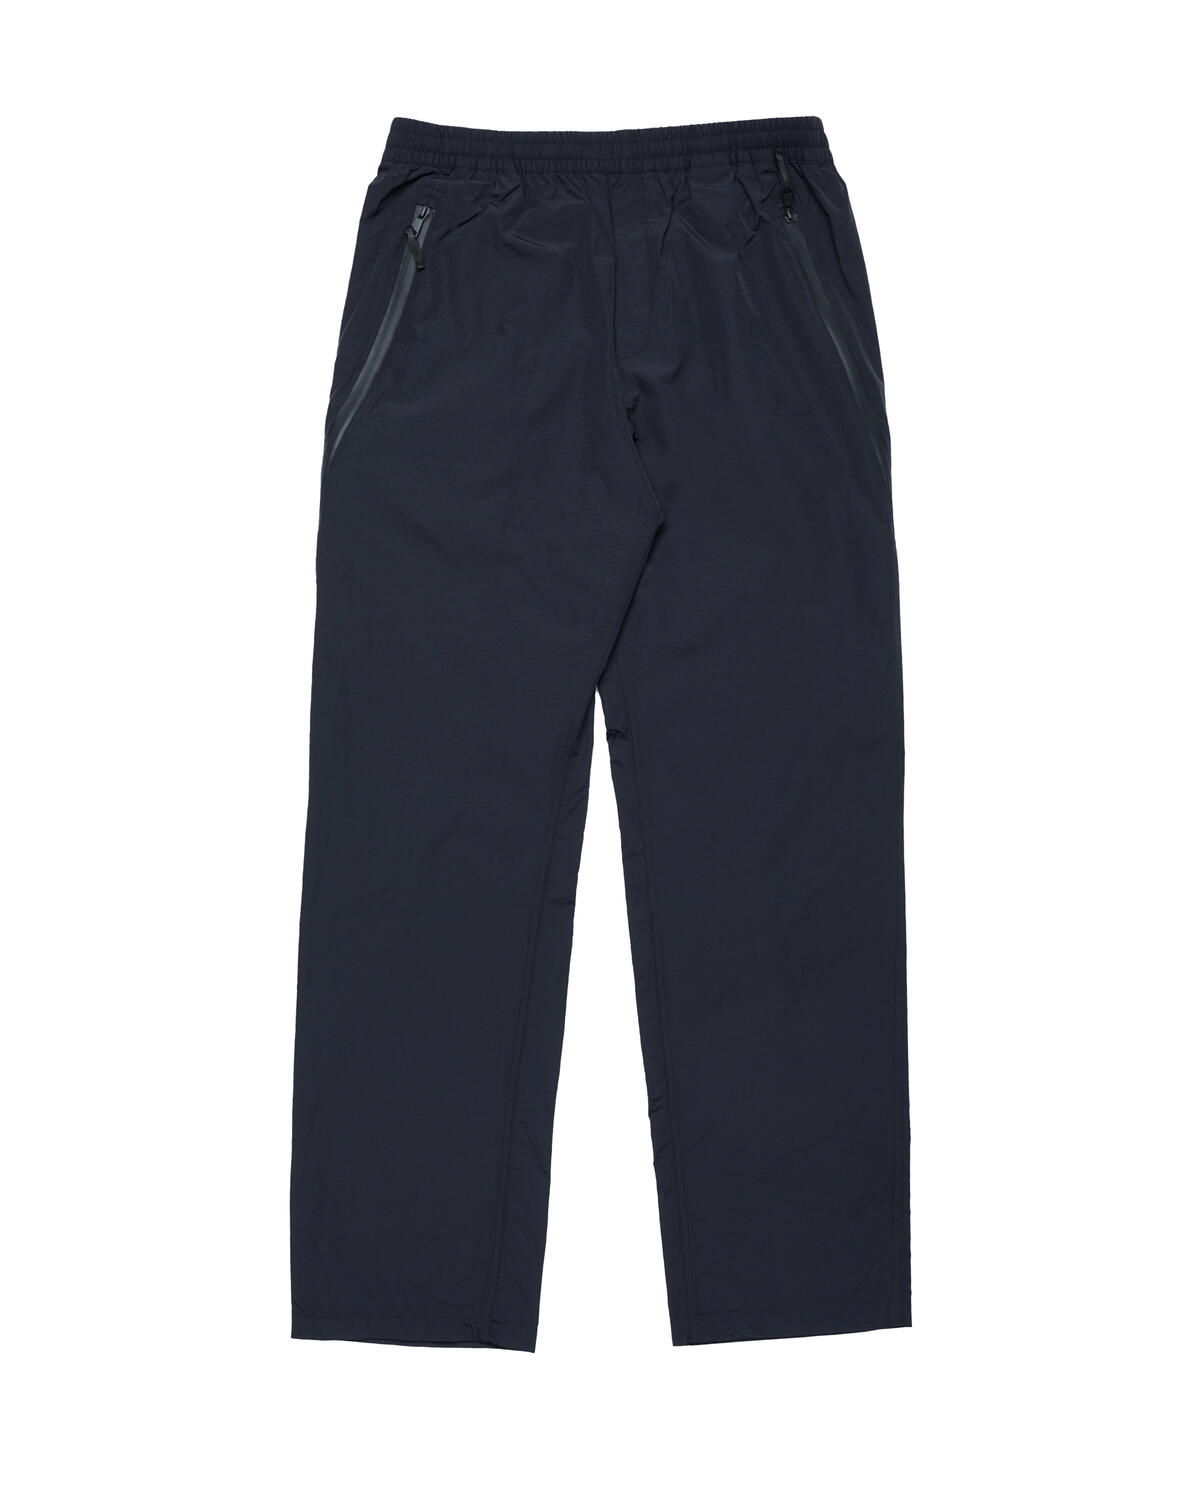 Wood Wood Halsey tech trousers | 12325003-7184-9999 | AFEW STORE